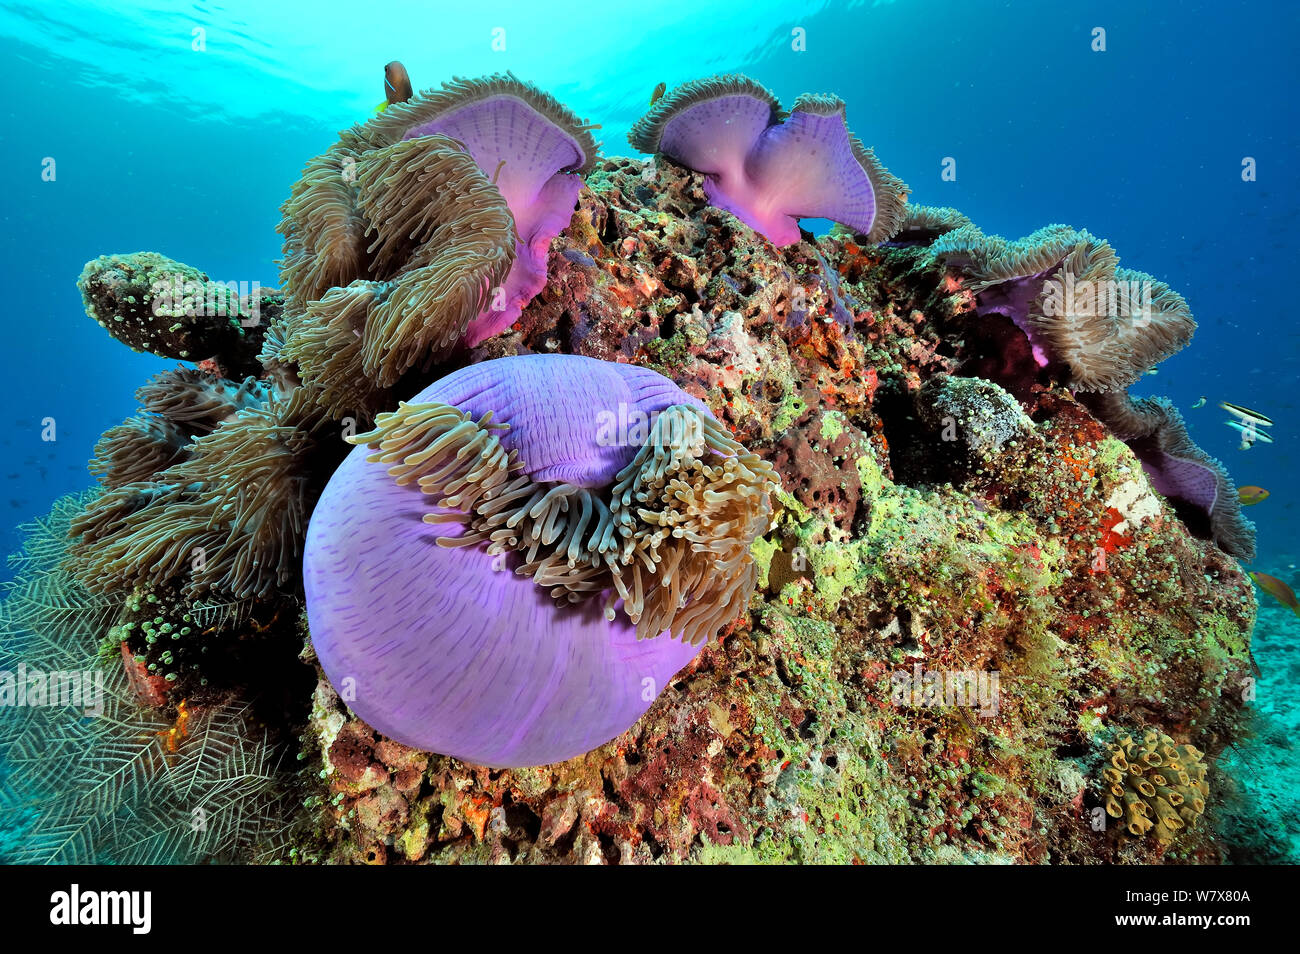 Magnificent sea anemones (Heteractis magnifica) with Maldives anemonefish (Amphiprion nigripes) on a coral reef,  Maldives. Indian ocean. Stock Photo